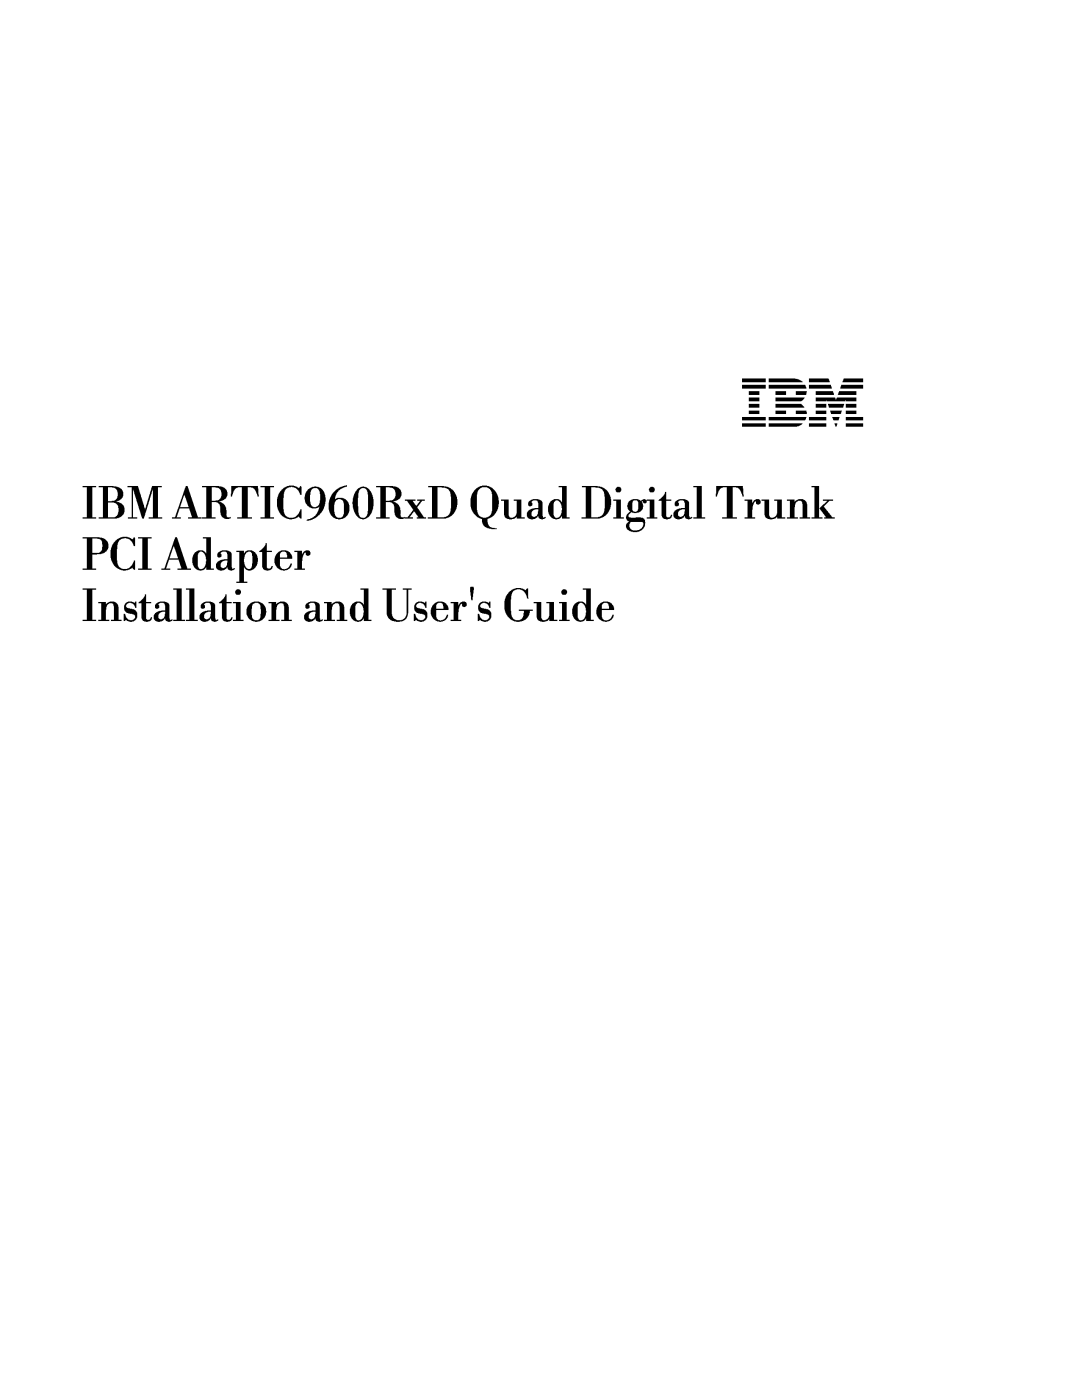 IBM manual IBM ARTIC960RxD Quad Digital Trunk PCI Adapter, Installation and Users Guide 